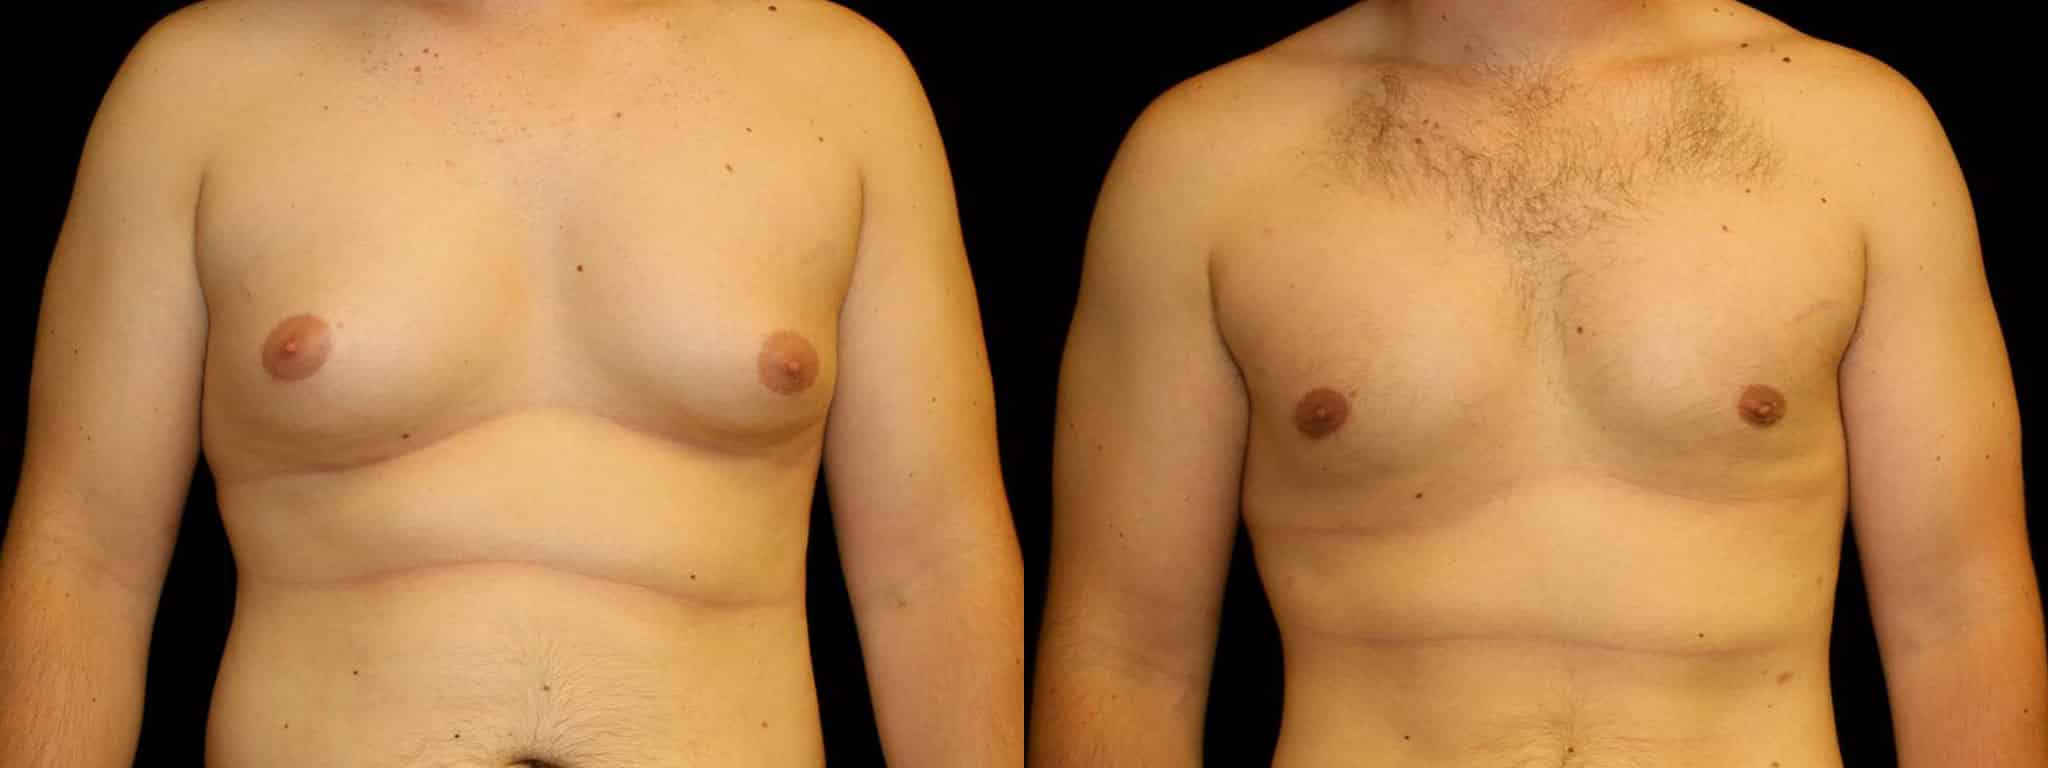 Gynecomastia Patient 3 Before & After Details